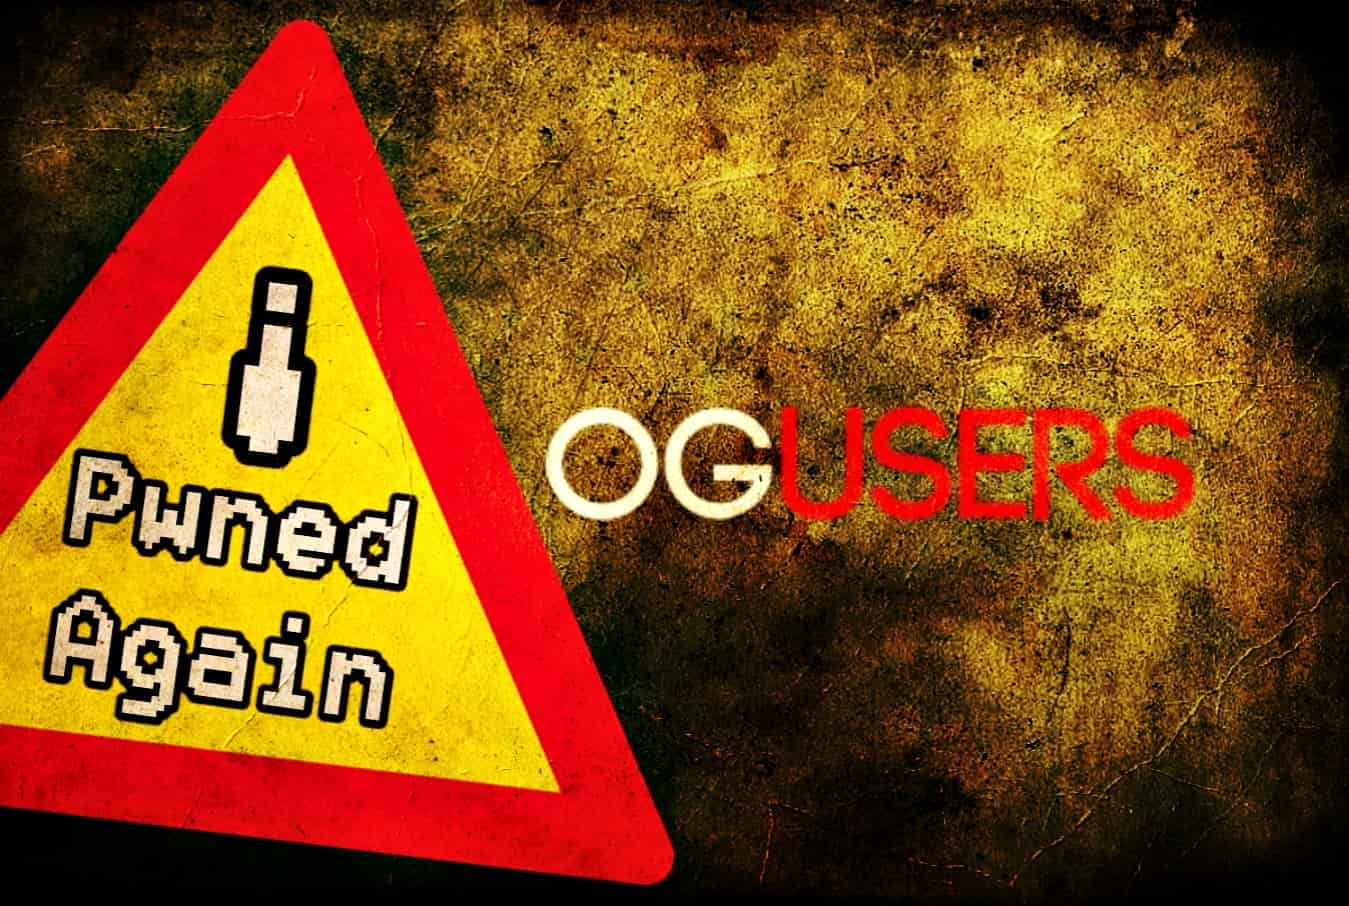 OGUsers hacking forum hacked; 200K+ user accounts dumped on rival forum